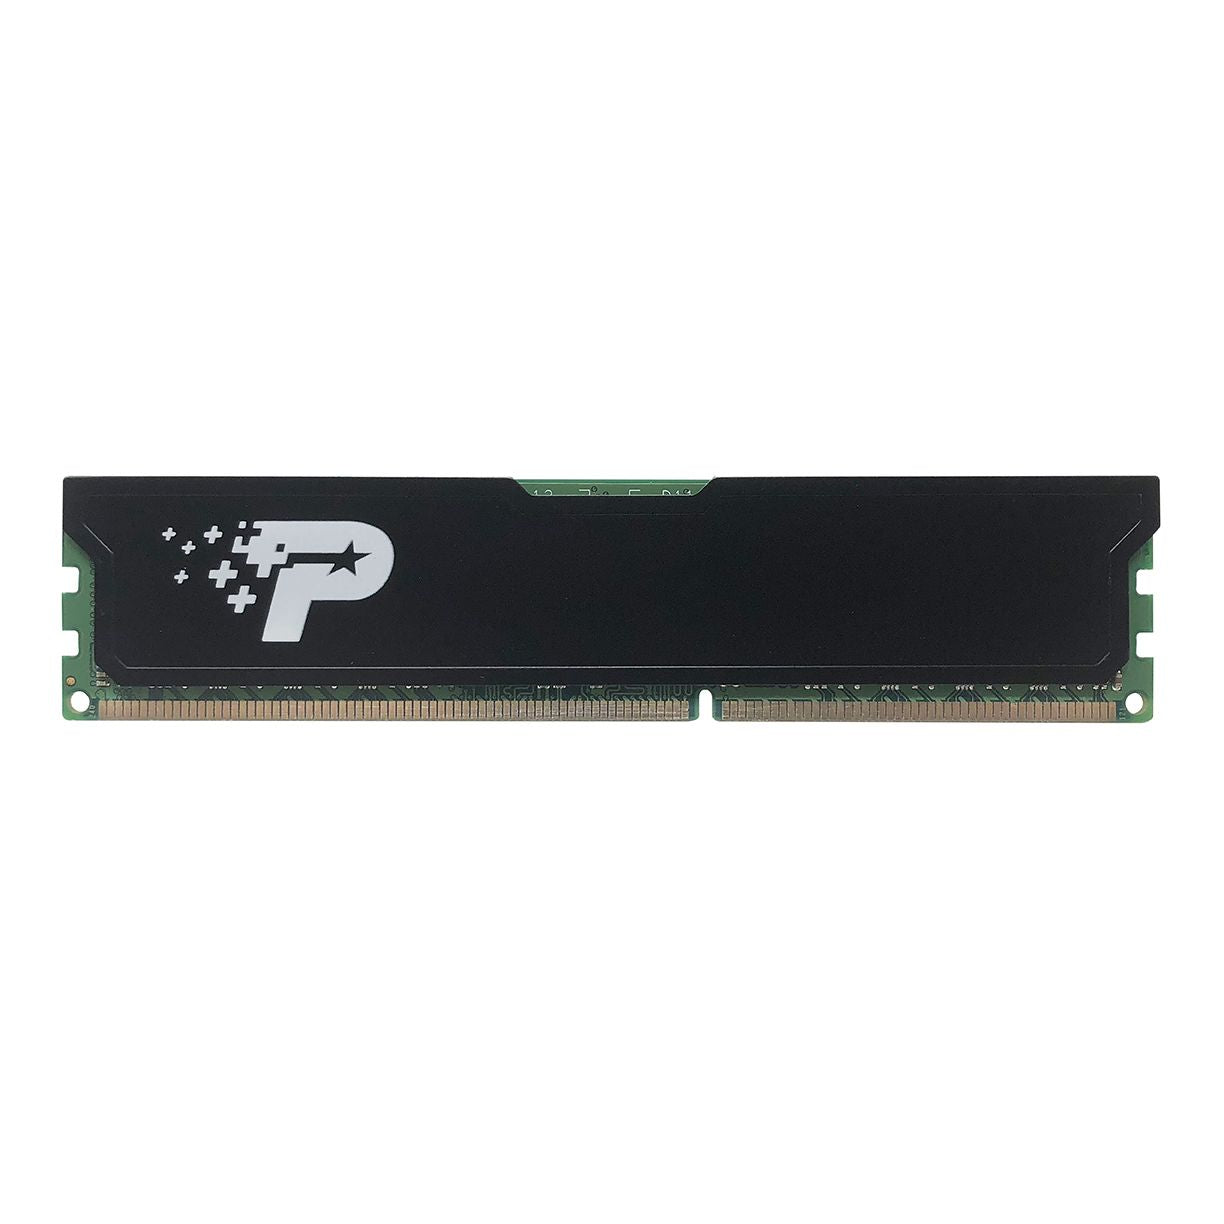 Patriot Signature Series - DDR3 UDIMM PC3-12800 (1600MHz) CL11_Single Module with Heatshield